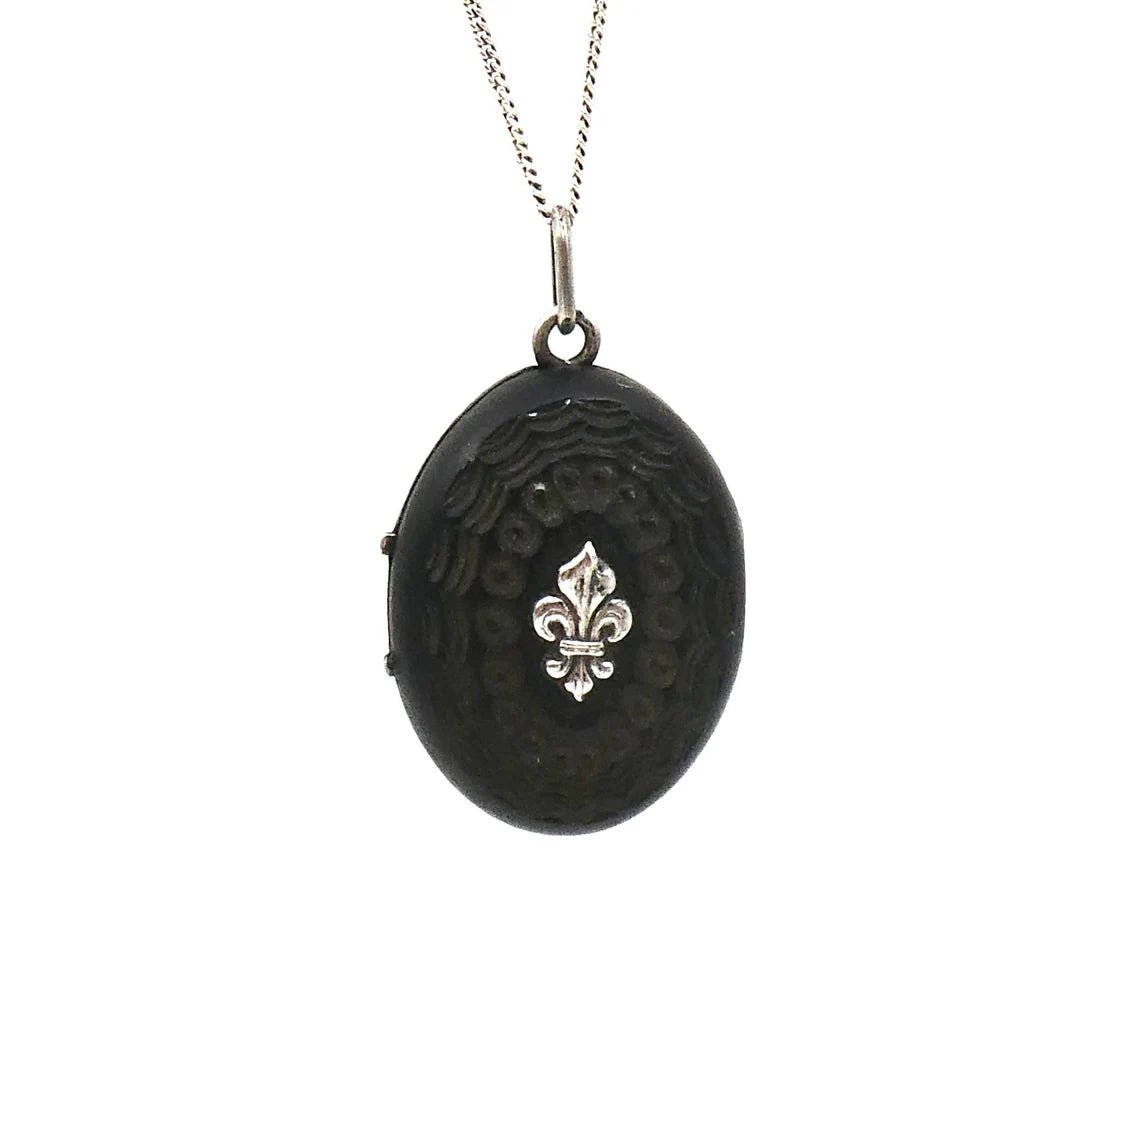 A unique carved black wooden locket with silver fleur de lis and initals in relief. - Collected